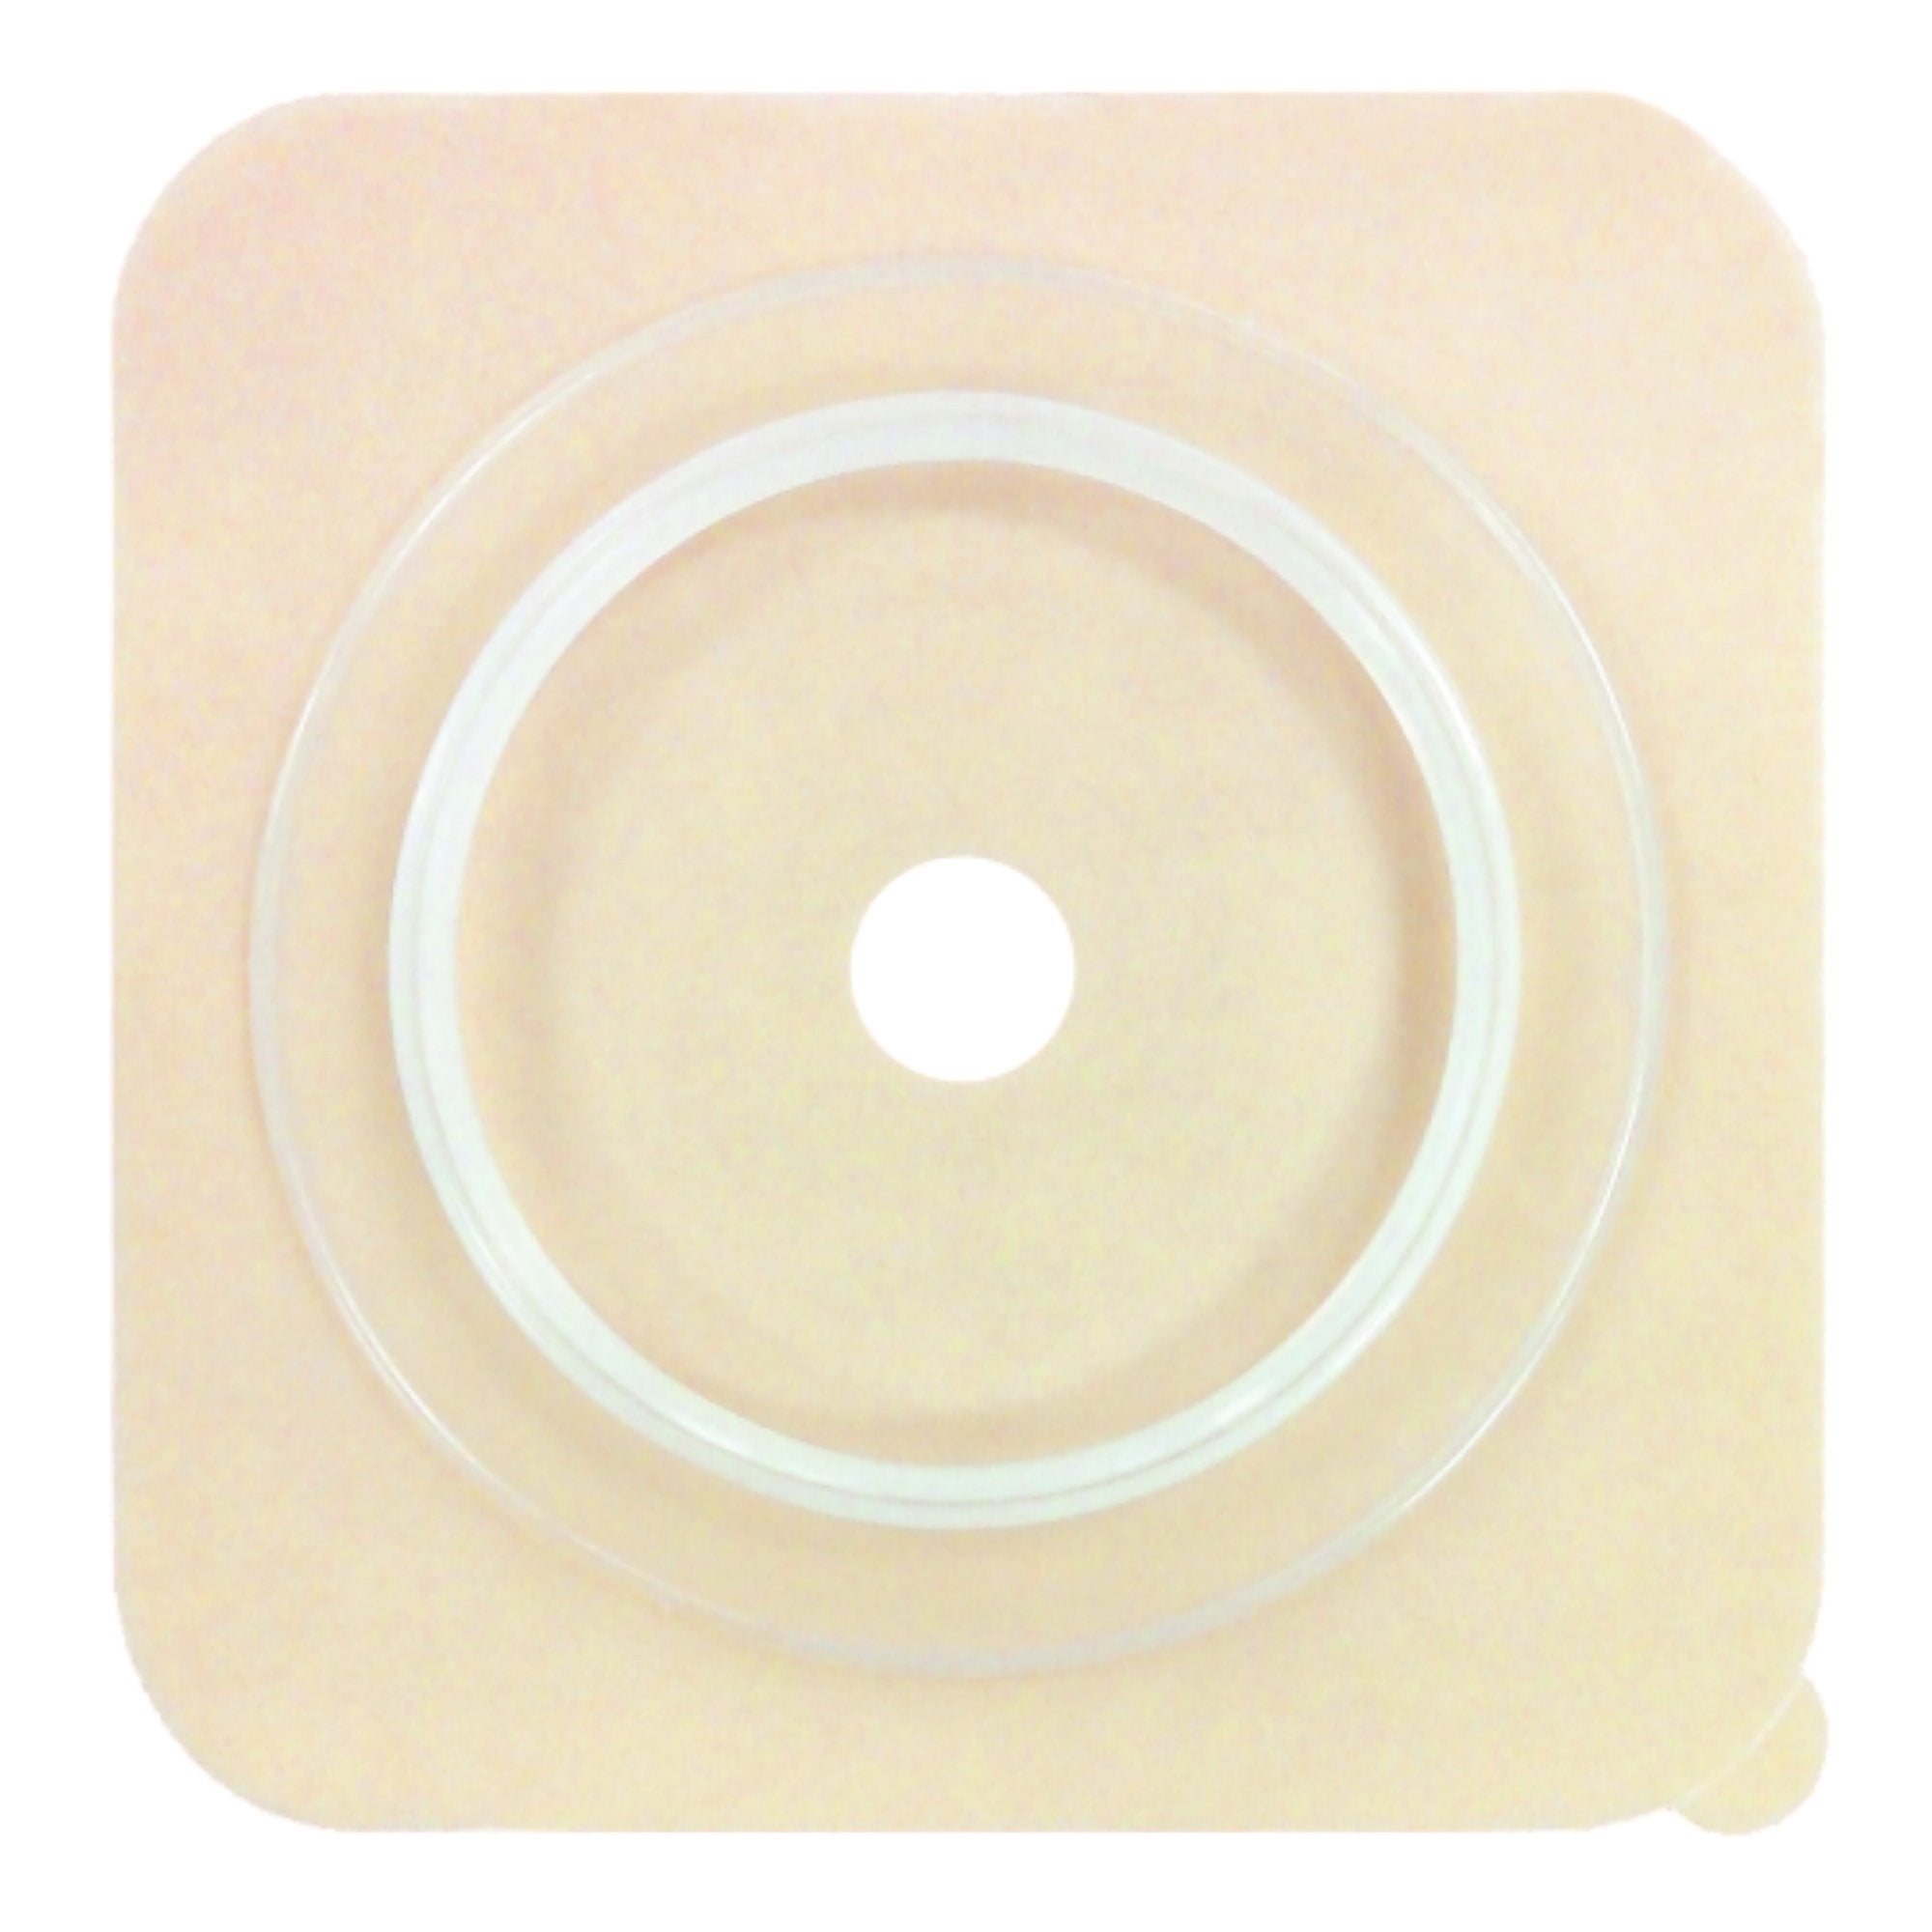 Ostomy Barrier Securi-T® Trim to Fit, Standard Wear 45 mm Flange Hydrocolloid Up to 1-1/4 Inch Opening 4 X 4 Inch